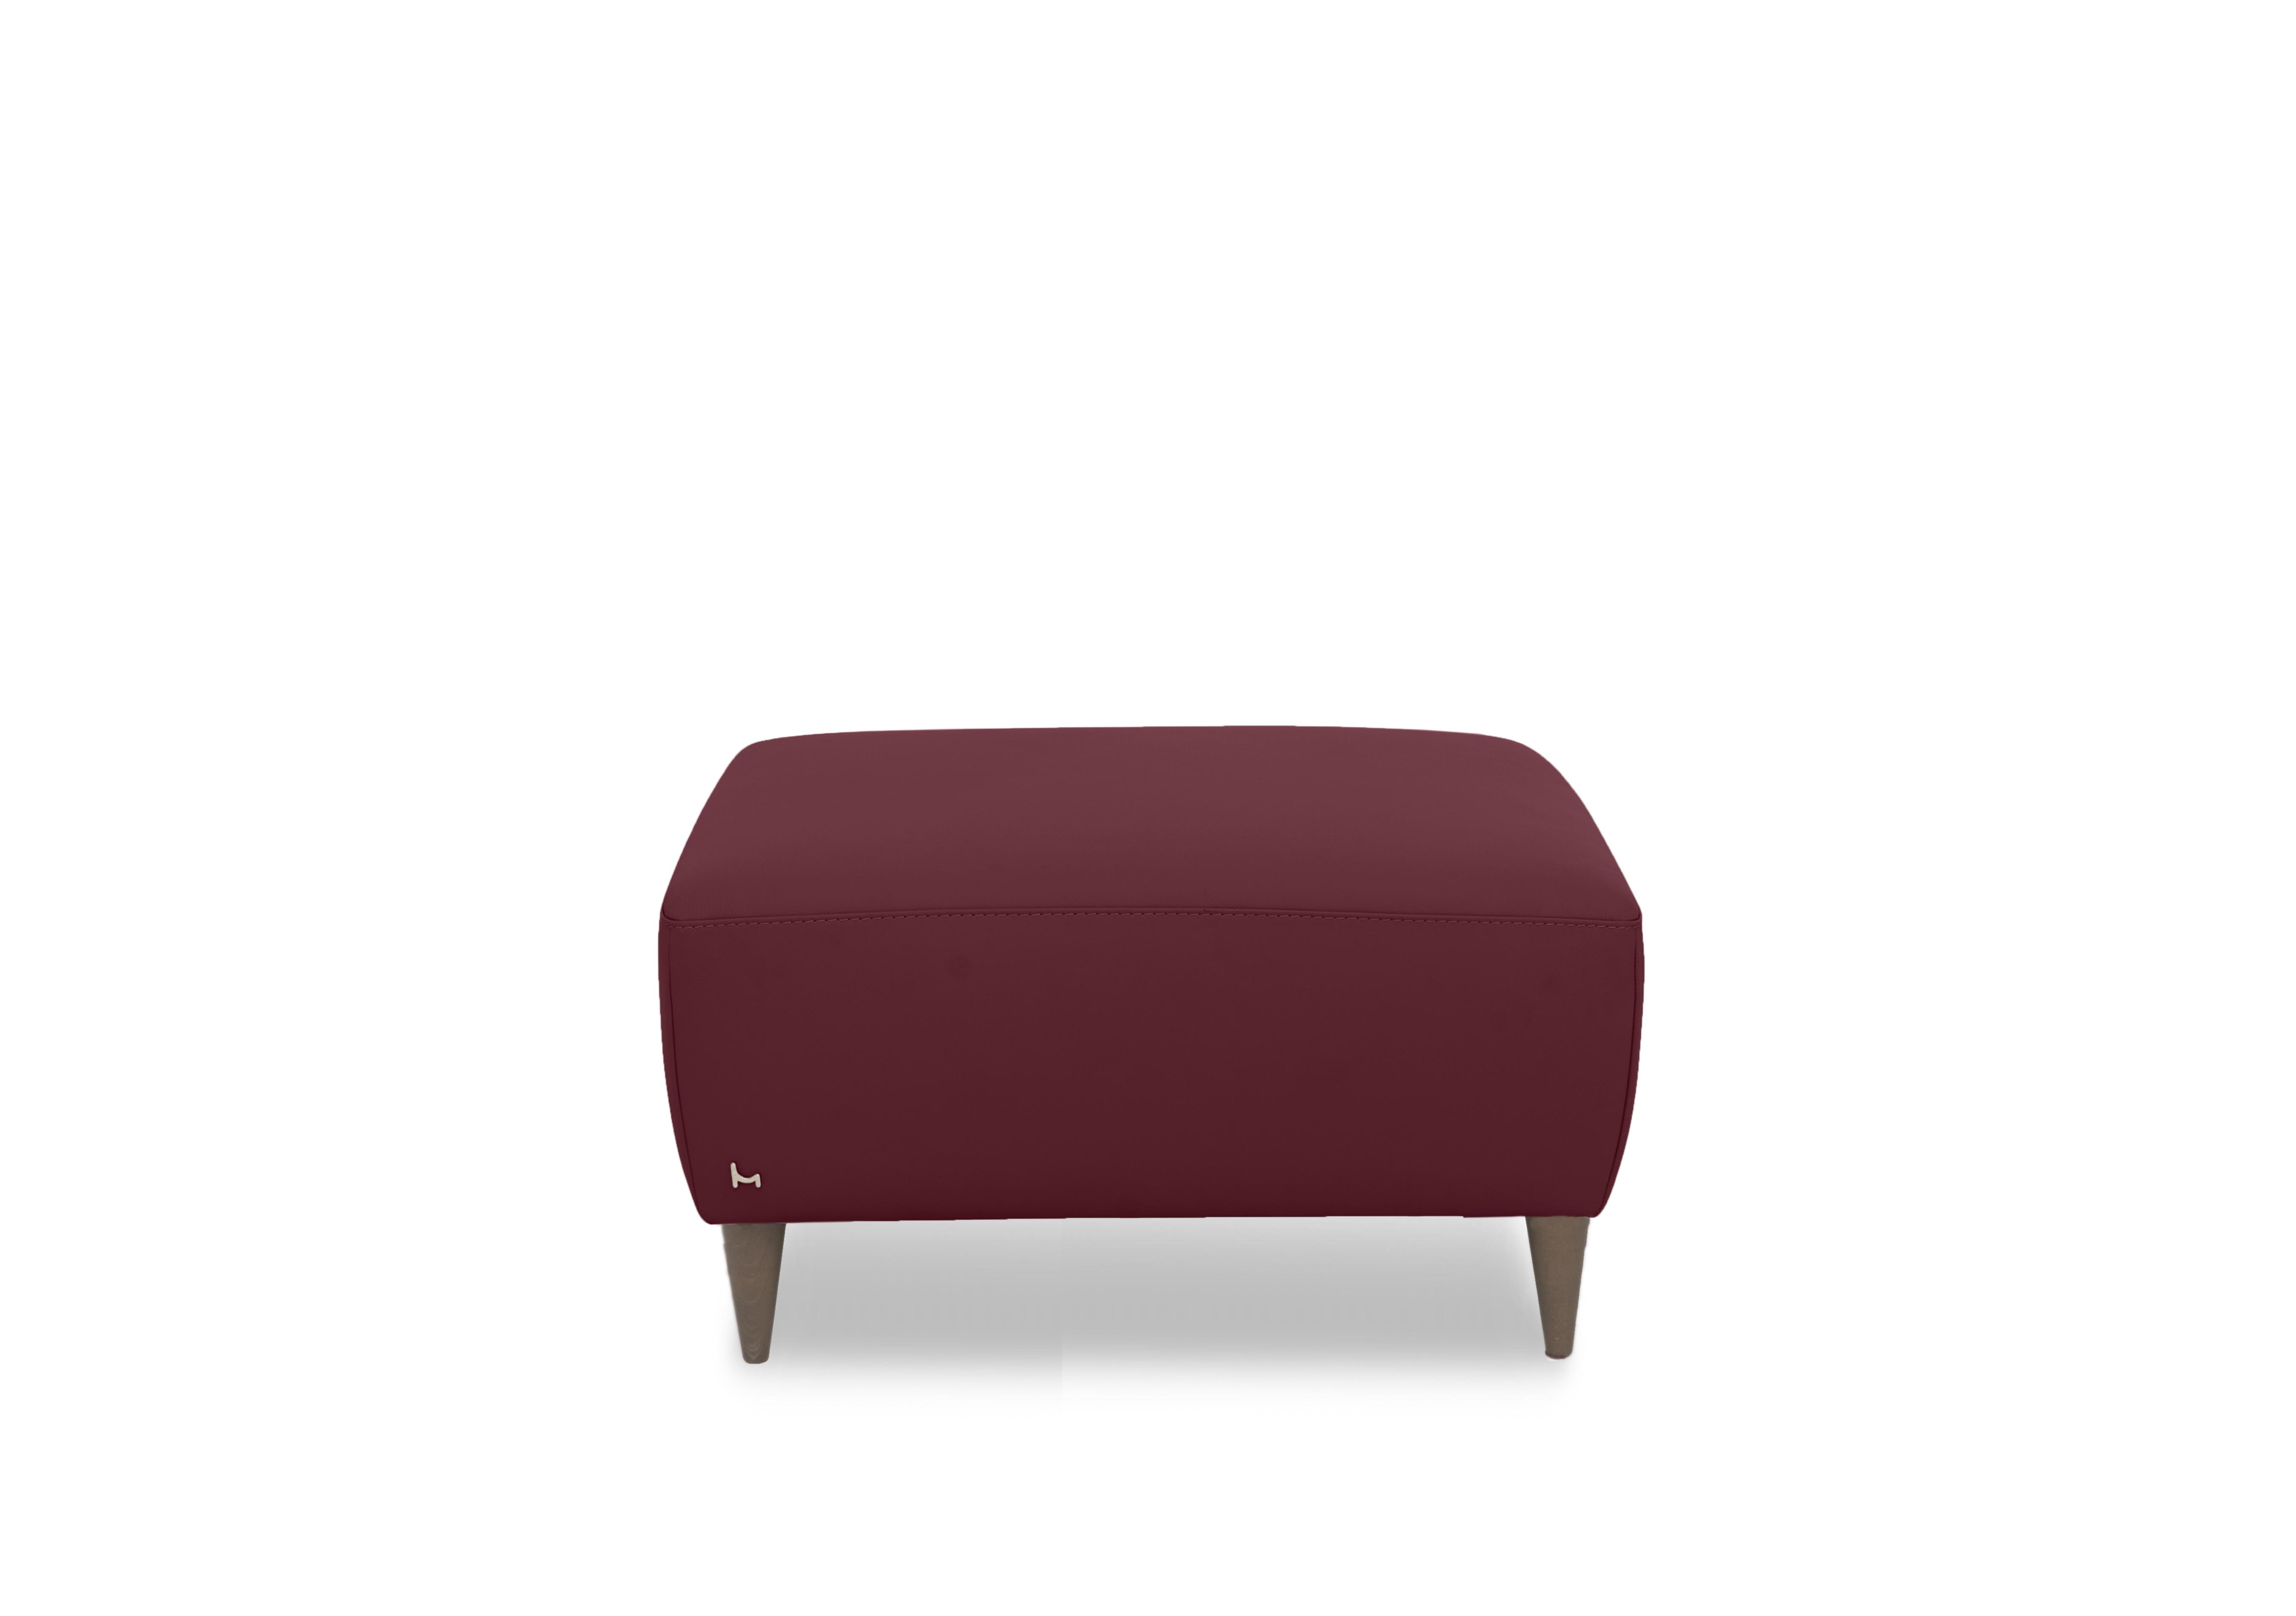 Milano Leather Footstool in 1521 Dali Bordeaux To Ft on Furniture Village